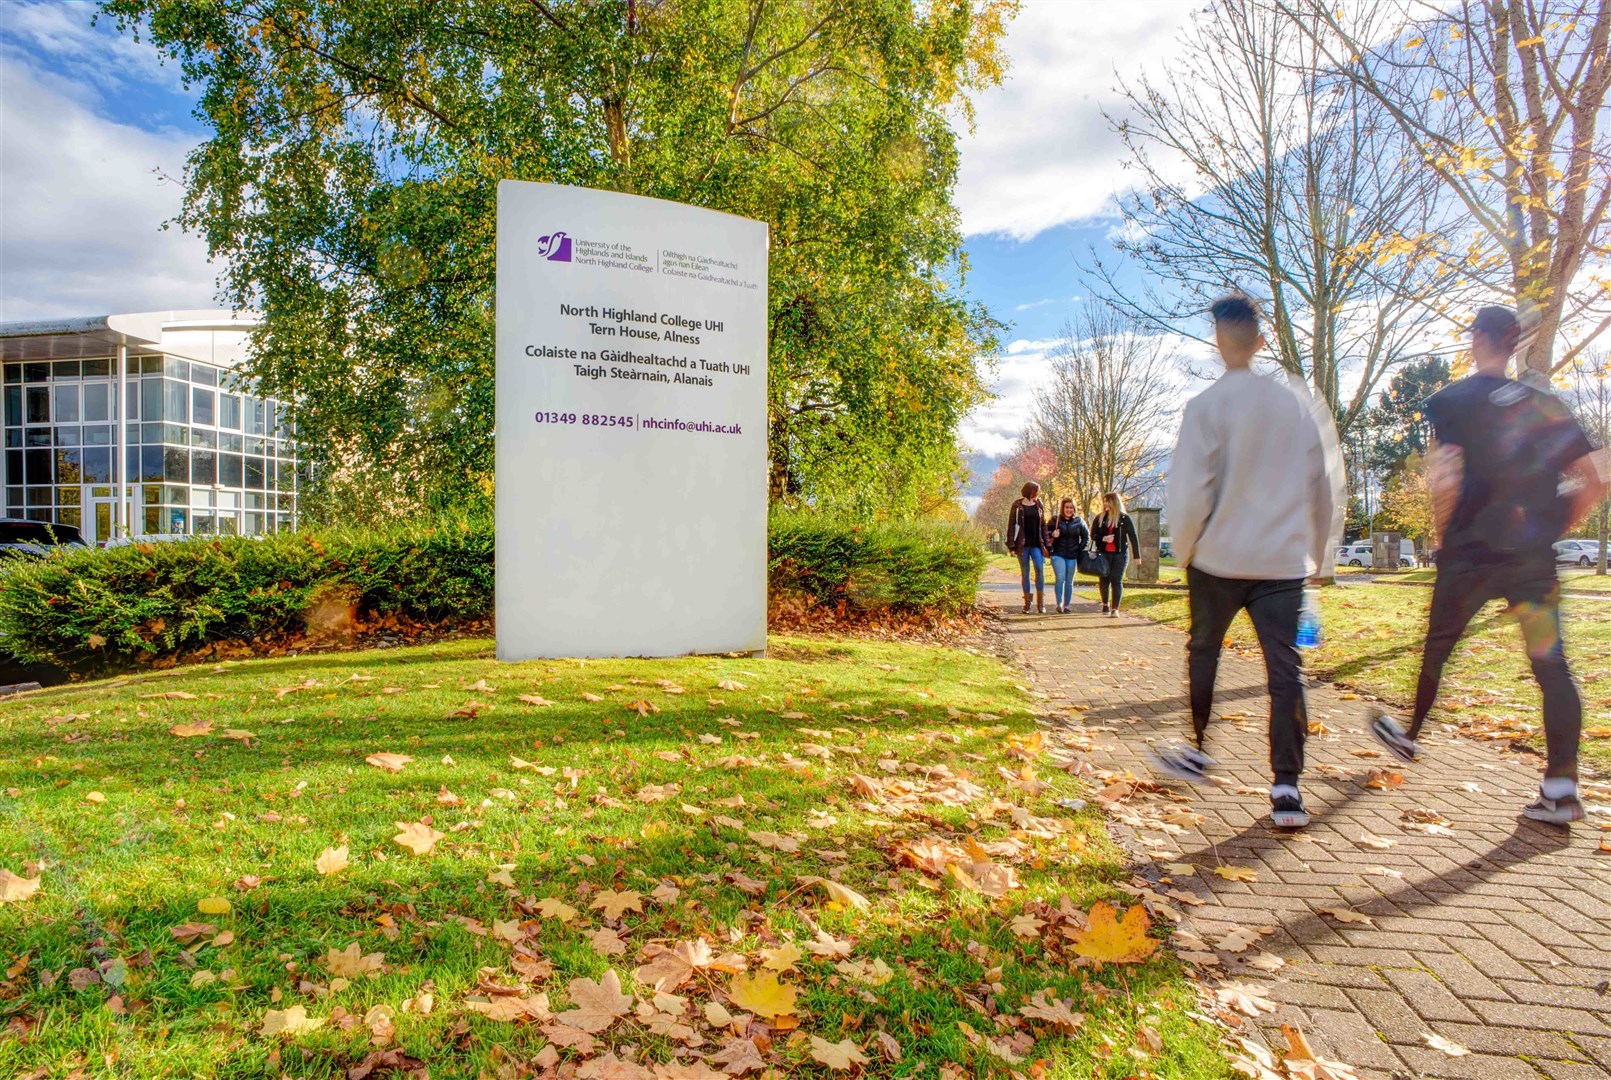 The Alness campus of the University of the Highlands and Islands will showcase what it can offer prospective students during its open day.